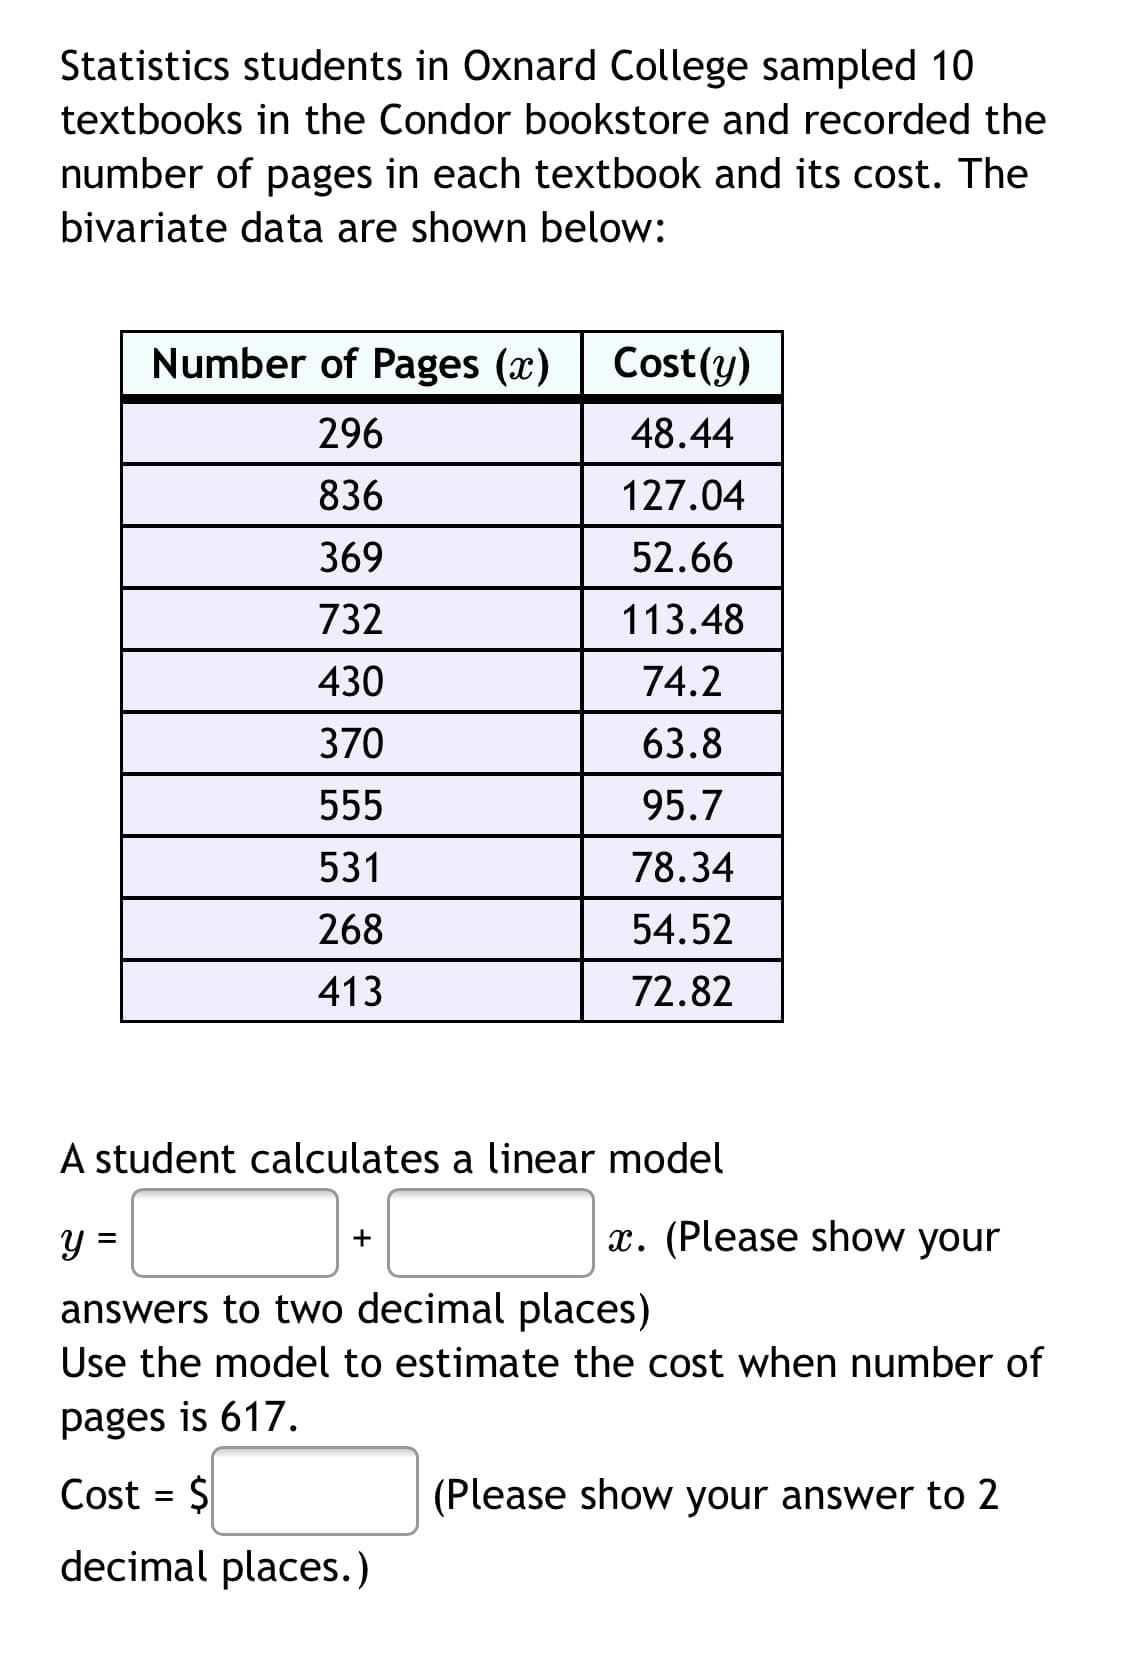 Statistics students in Oxnard College sampled 10
textbooks in the Condor bookstore and recorded the
number of pages in each textbook and its cost. The
bivariate data are shown below:
Number of Pages (x)
Cost(y)
296
48.44
836
127.04
369
52.66
732
113.48
430
74.2
370
63.8
555
95.7
531
78.34
268
54.52
413
72.82
A student calculates a linear model
y =
x. (Please show your
+
answers to two decimal places)
Use the model to estimate the cost when number of
pages is 617.
Cost = $
(Please show your answer to 2
decimal places.)
